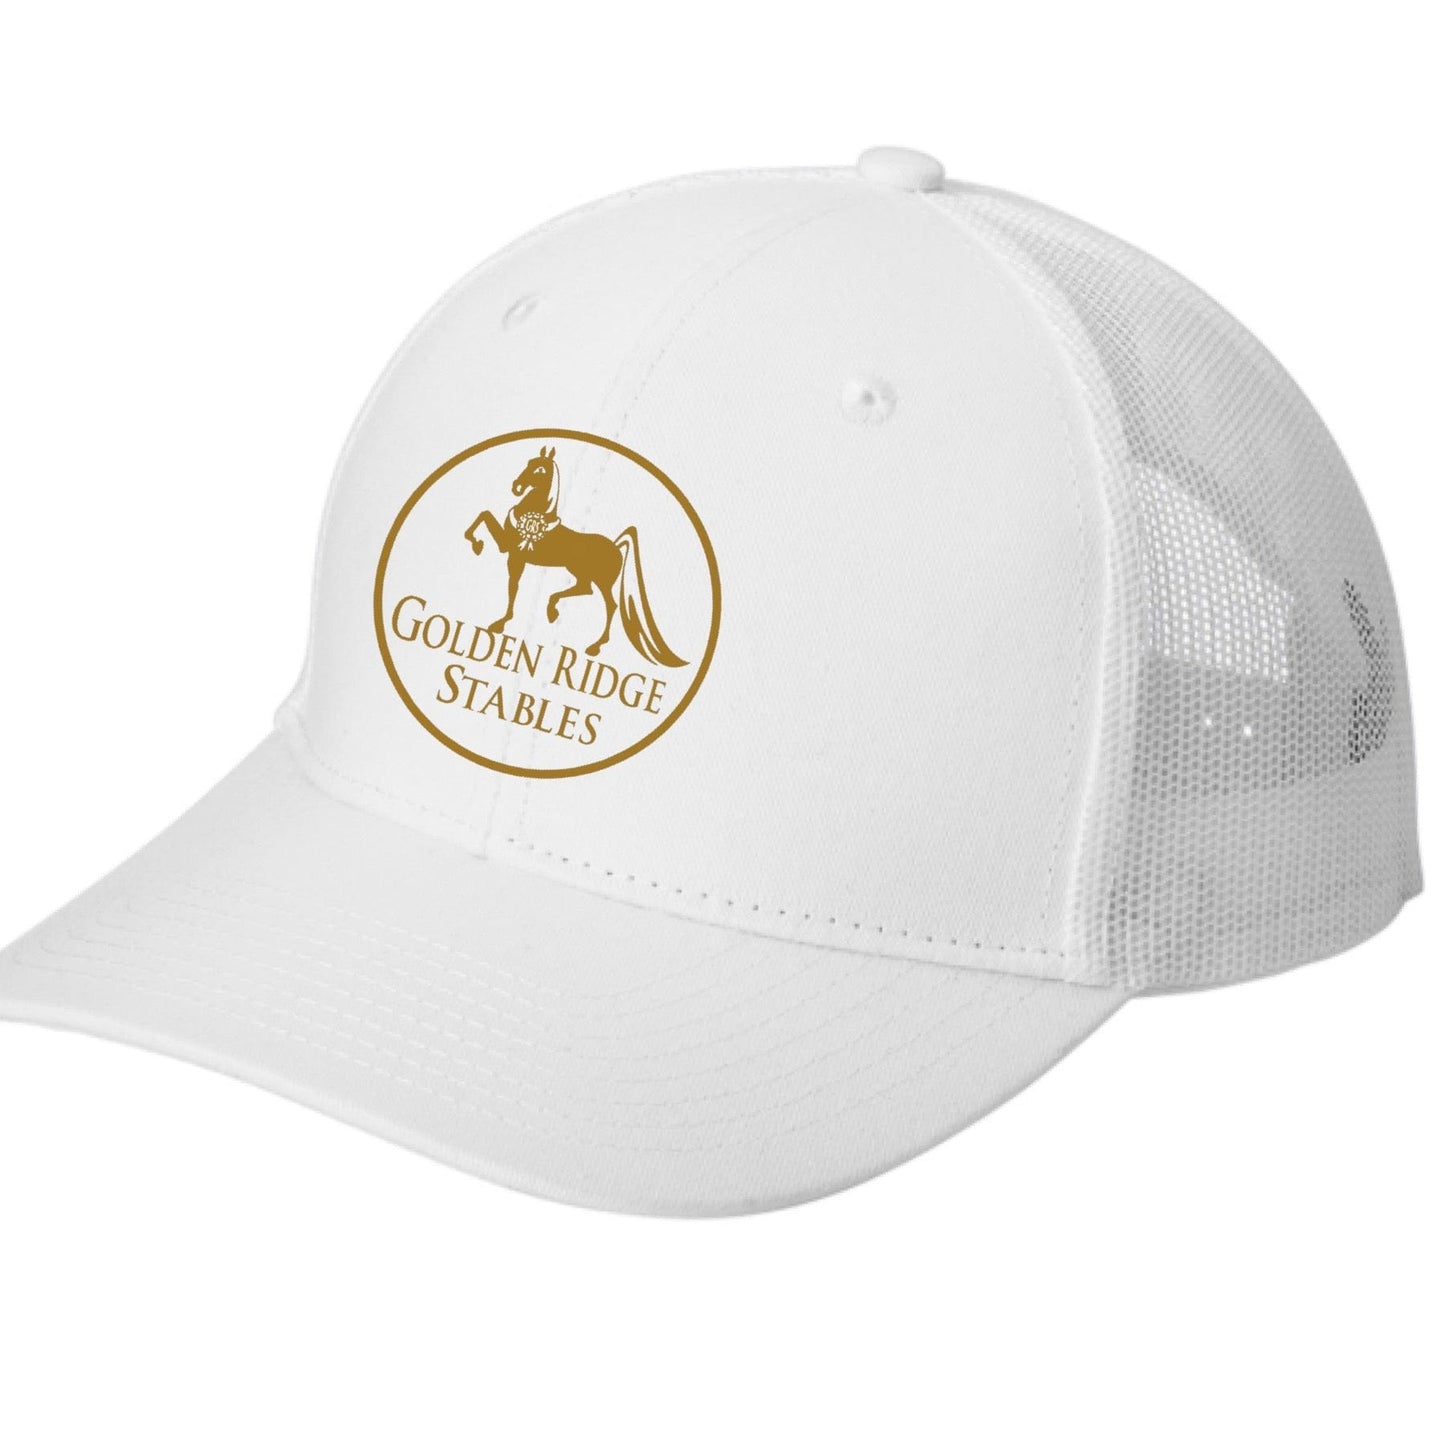 Equestrian Team Apparel Golden Ridge Stables Trucker Cap equestrian team apparel online tack store mobile tack store custom farm apparel custom show stable clothing equestrian lifestyle horse show clothing riding clothes horses equestrian tack store